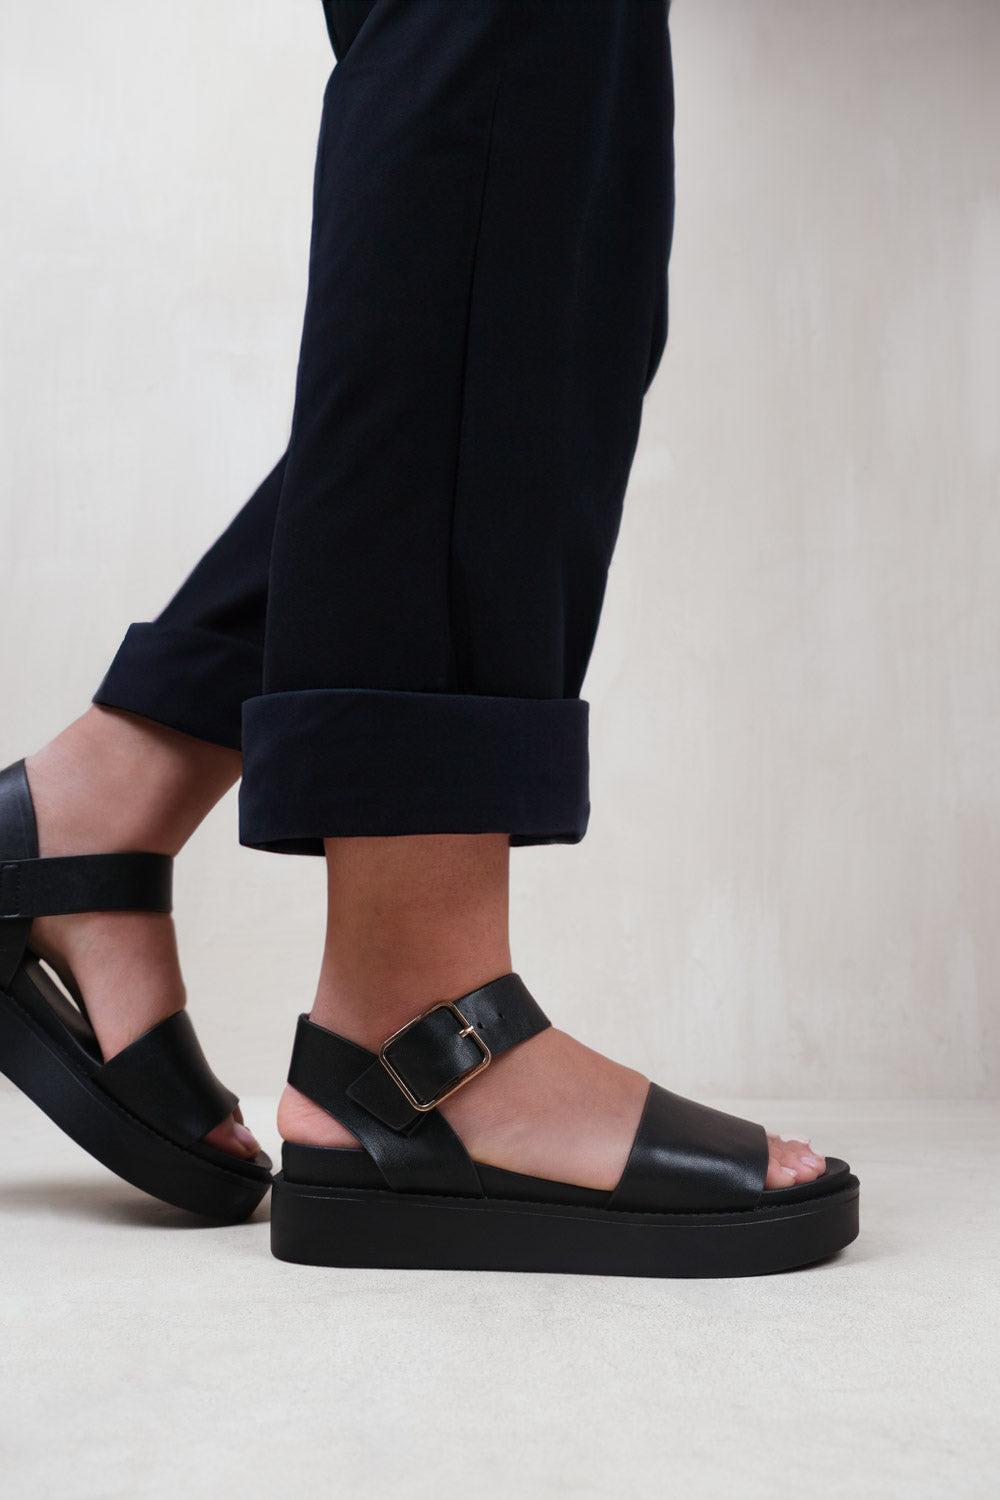 PHOENIX EXTRA WIDE FIT CLASSIC FLAT SANDALS WITH STRAP AND BUCKLE DETAIL IN BLACK FAUX LEATHER